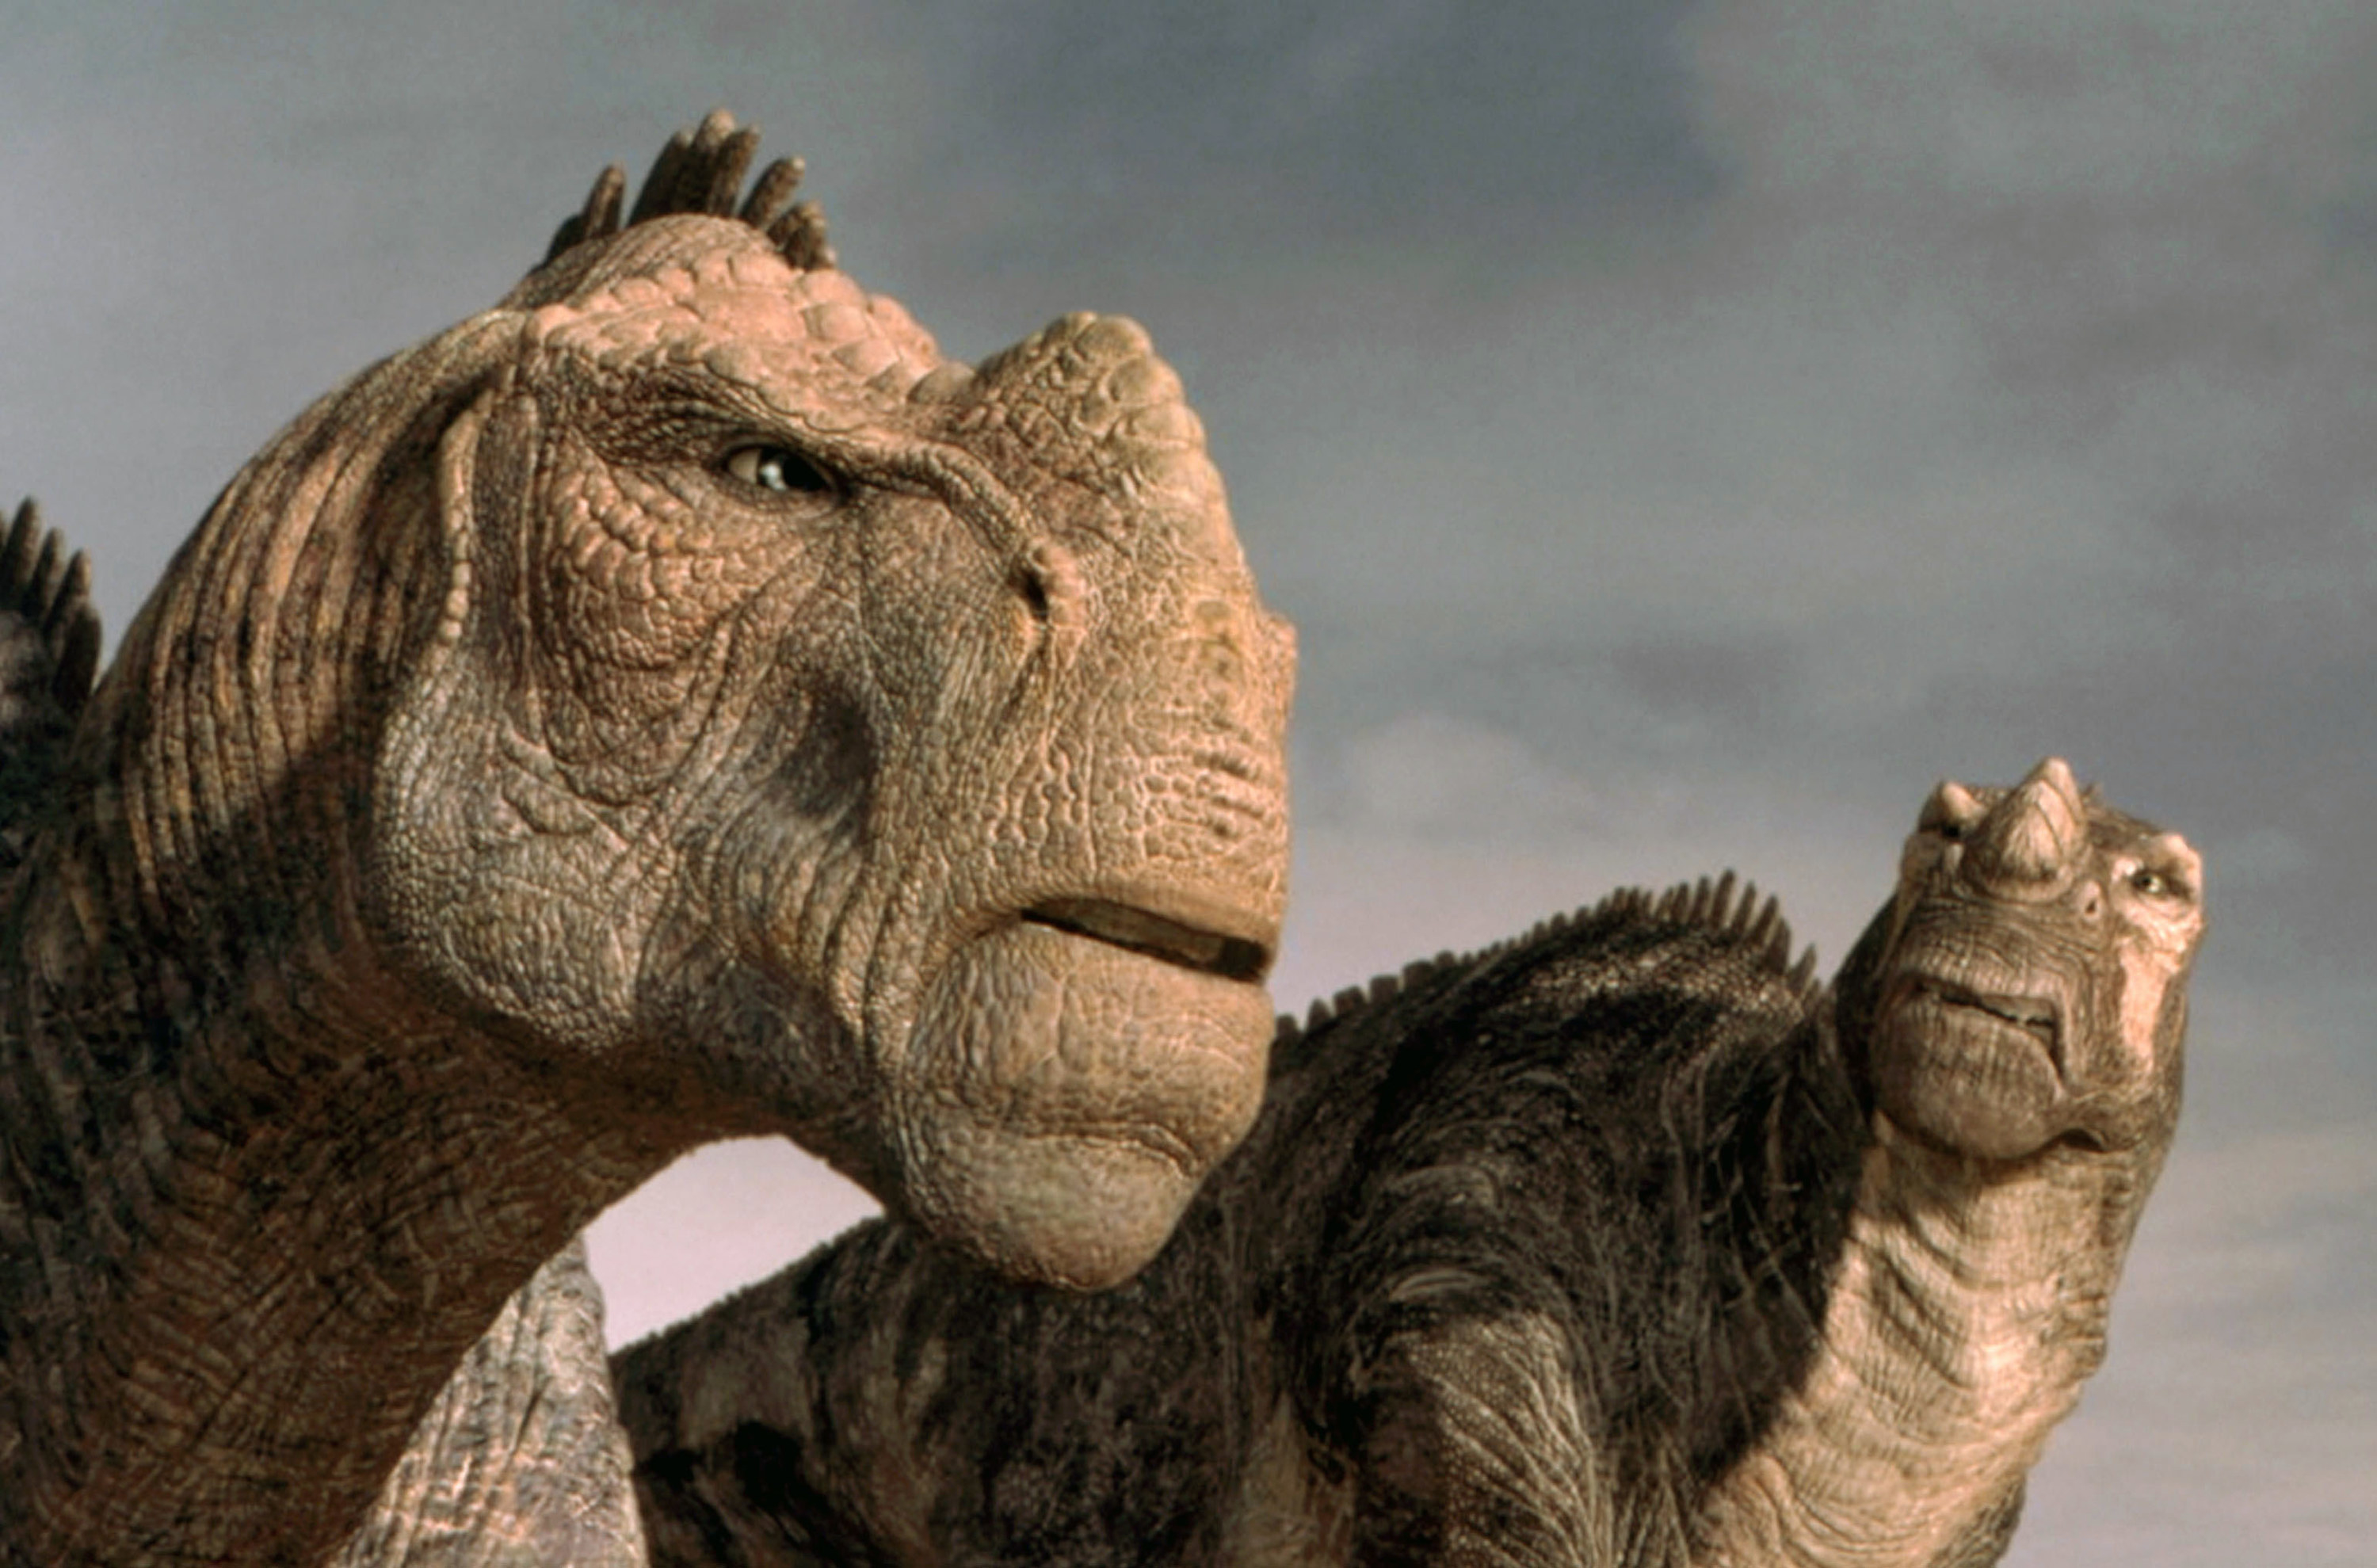 Two CGI dinosaurs from the movie looking at each other angrily